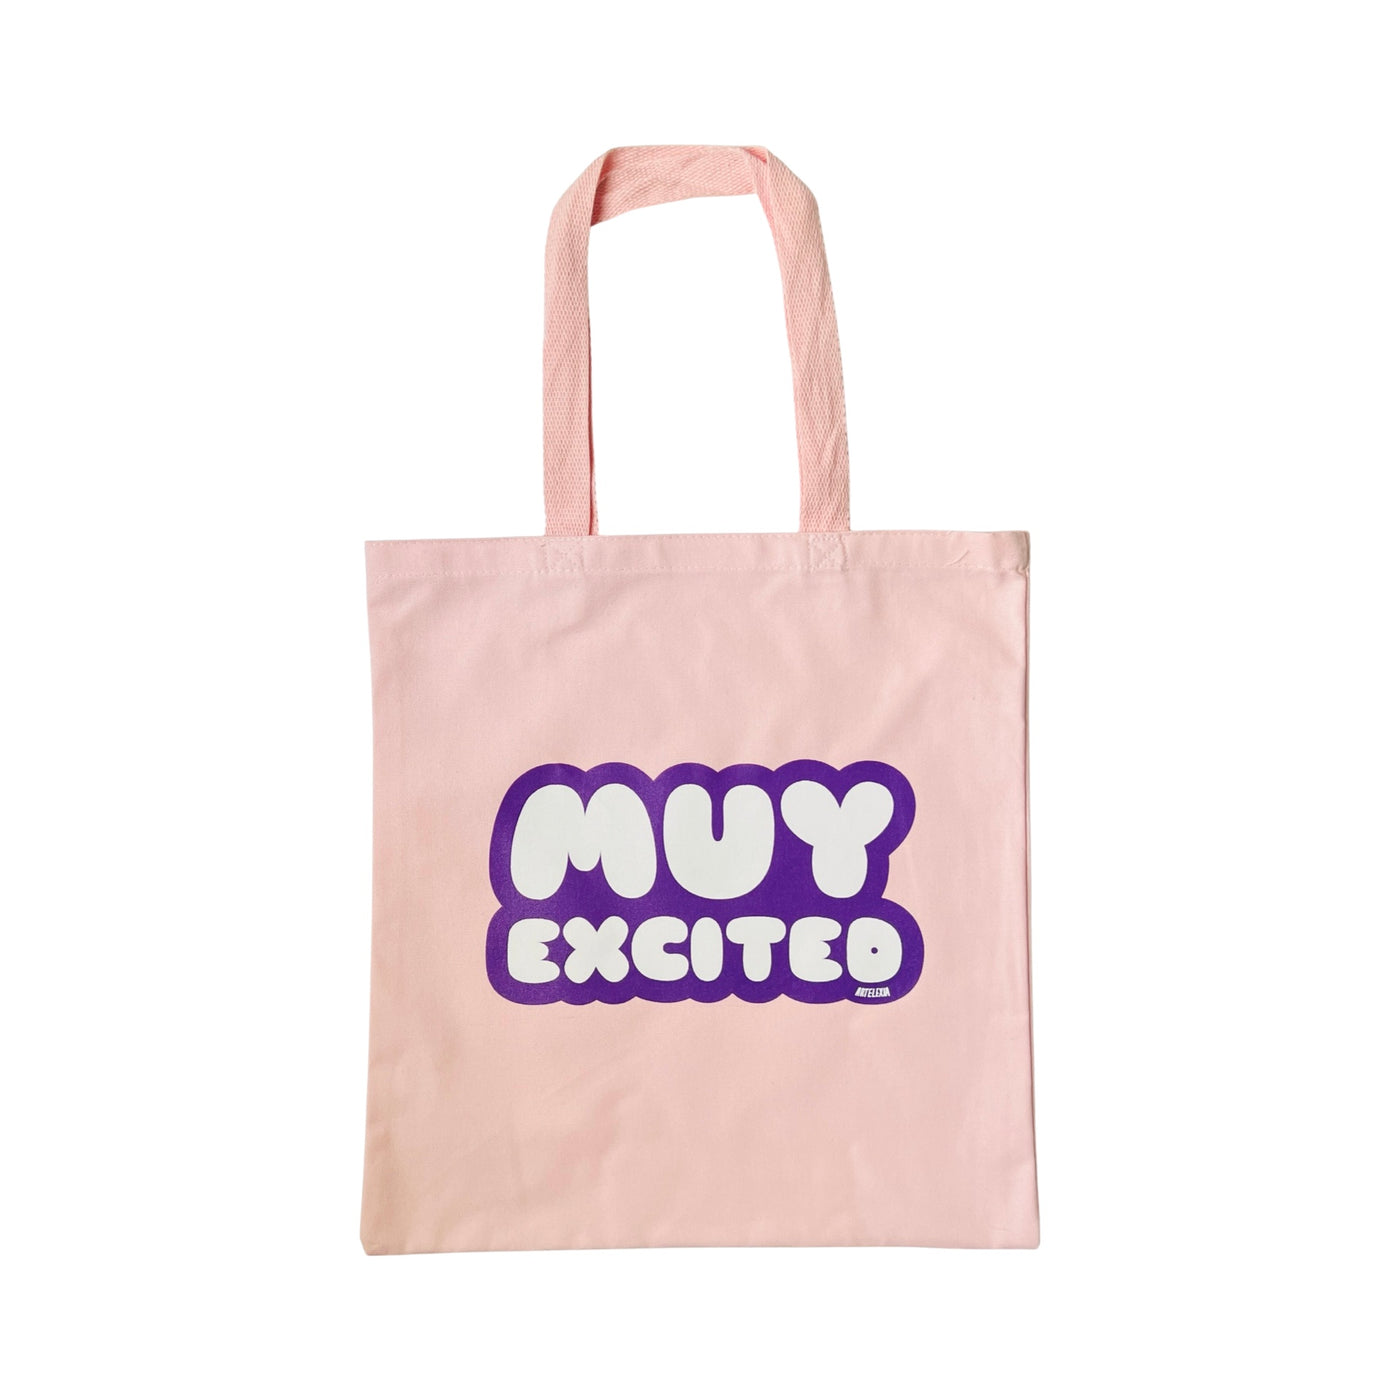 Light pink canvas tote bag with the phrase Muy Excited in white lettering outlined in purple.